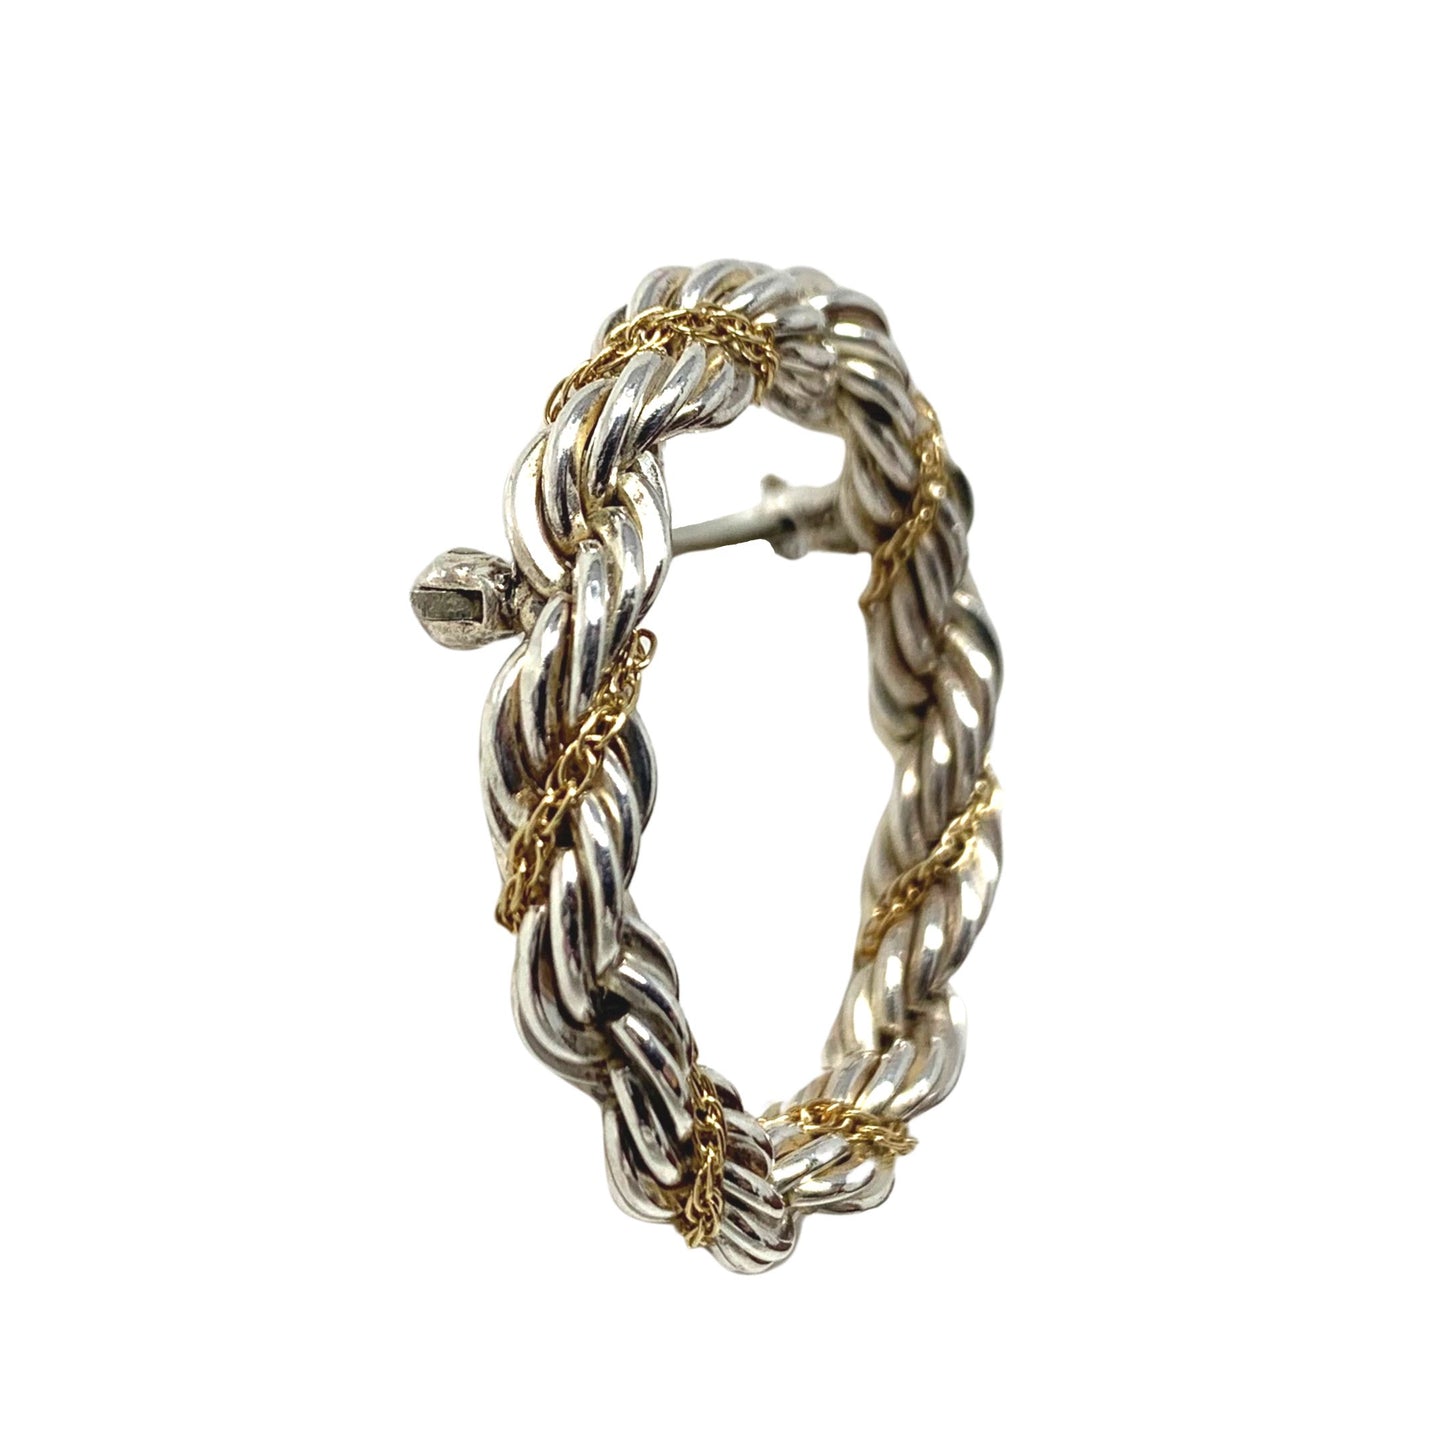 Tiffany & Co 14K Gold/ Sterling Circle Rope Wreath Brooch